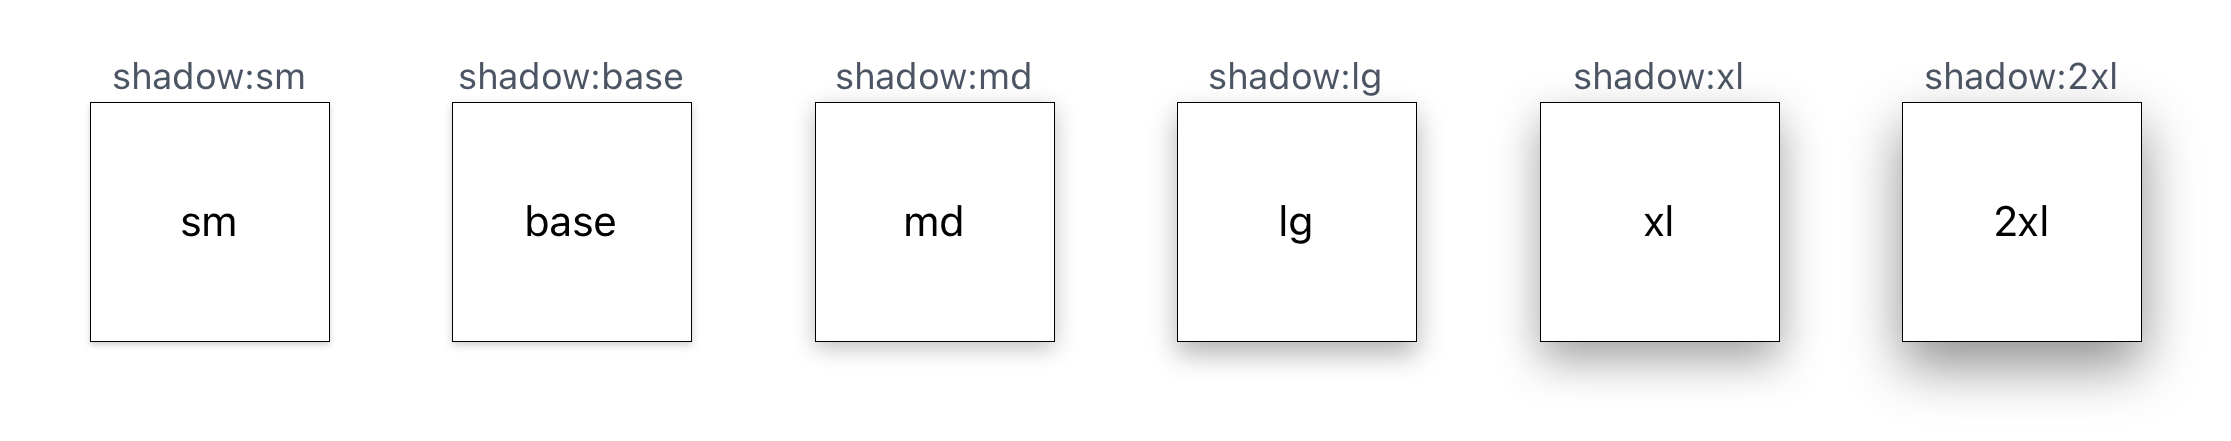 A screenshot of the default shadows scale shown in a simulator